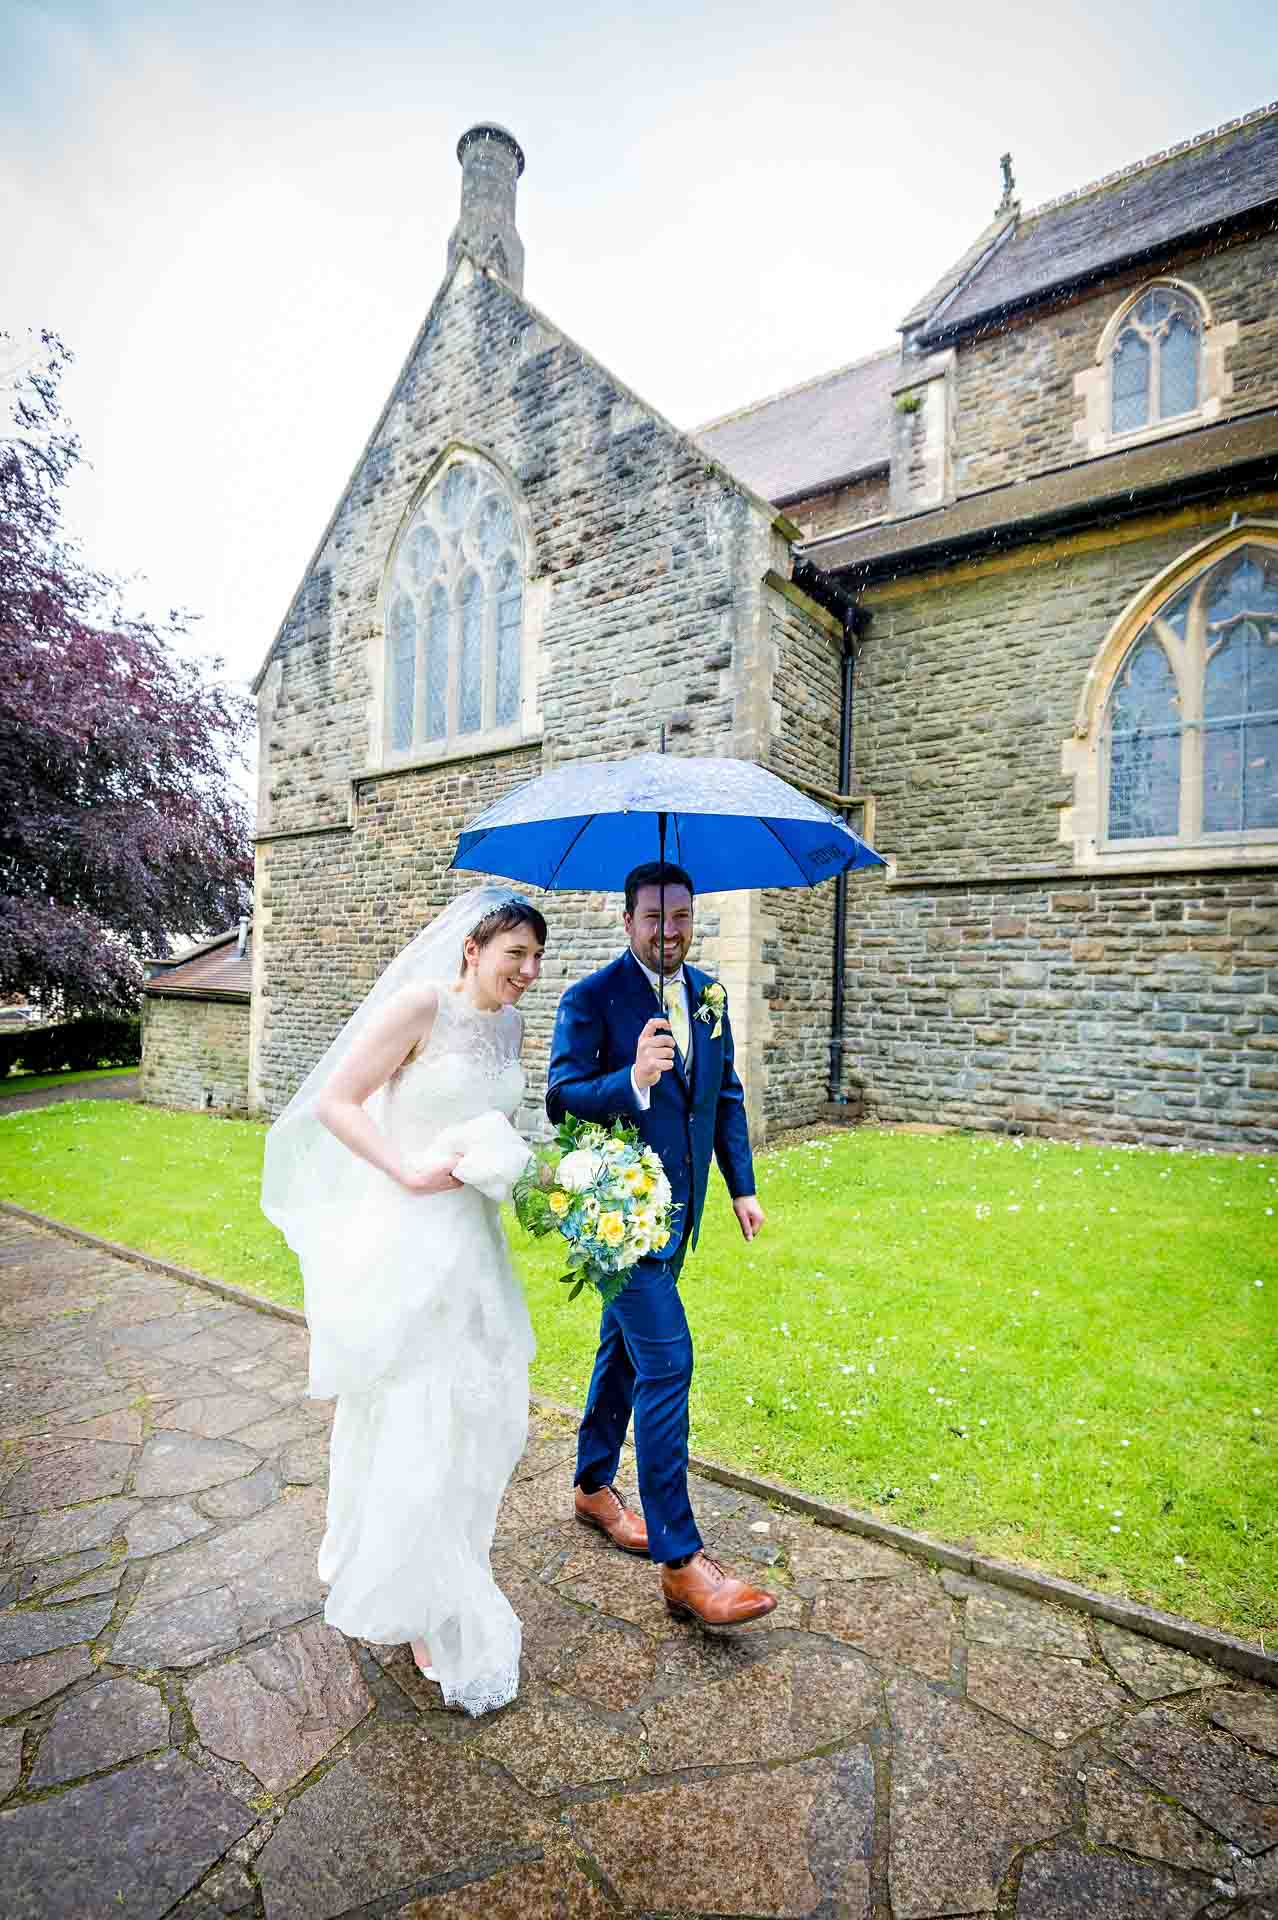 Bride and groom walking outside church in rain with umbrella